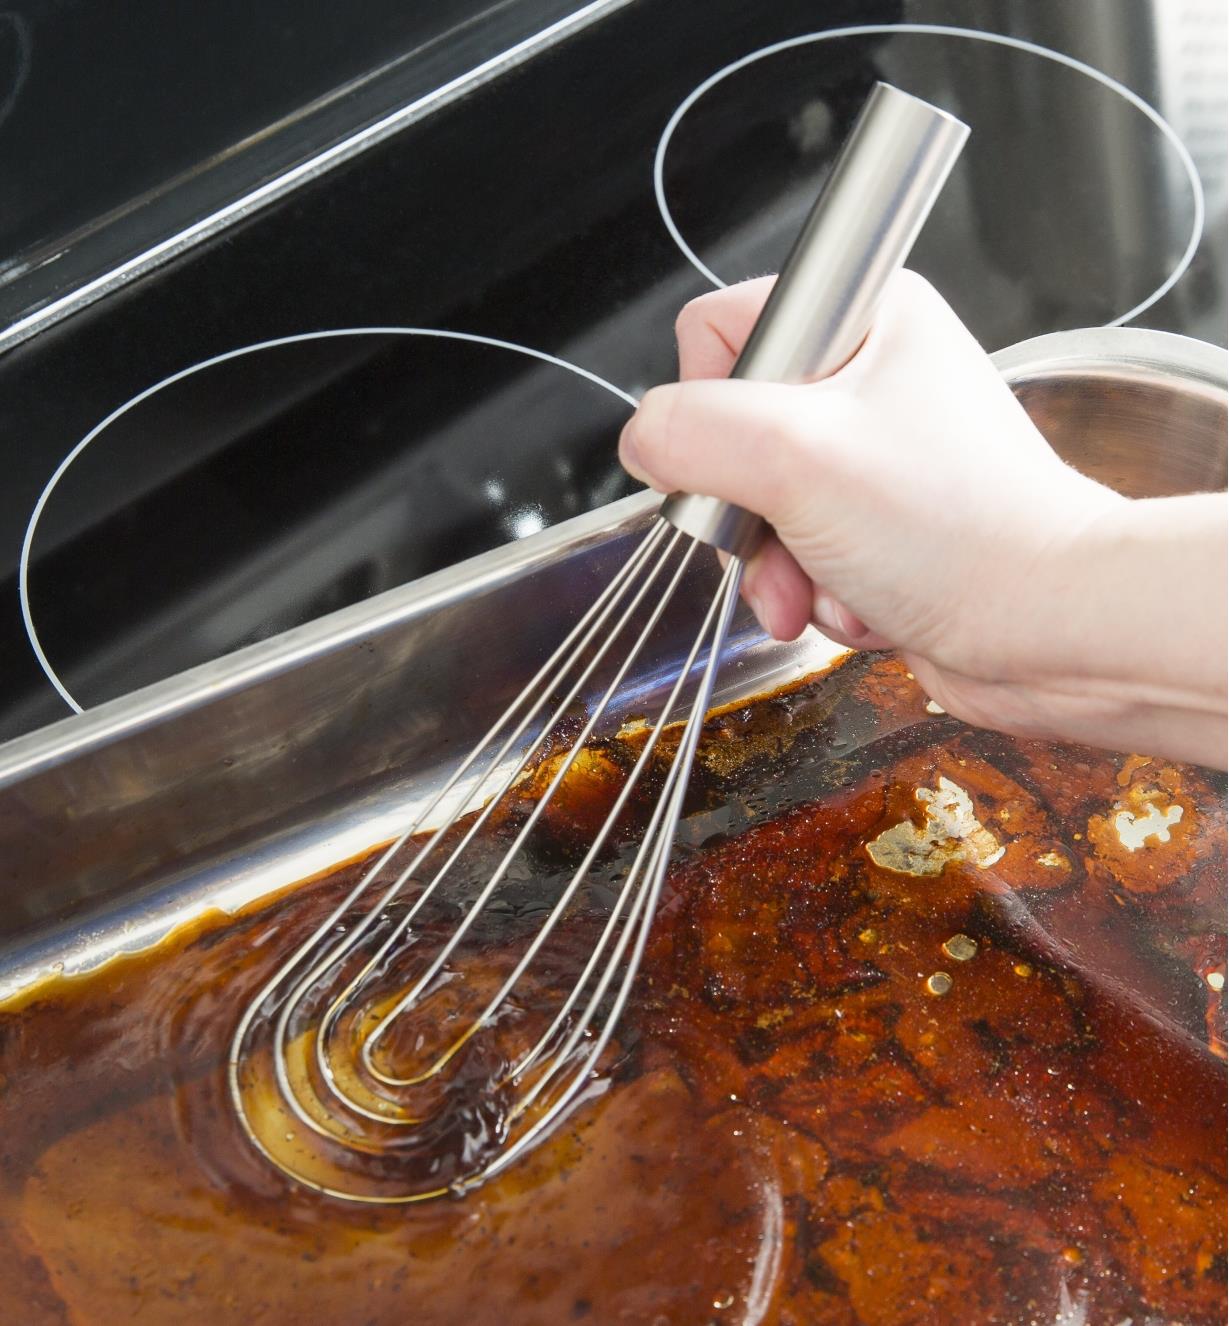 Using a 10" flat whisk to mix meat juices in a pan